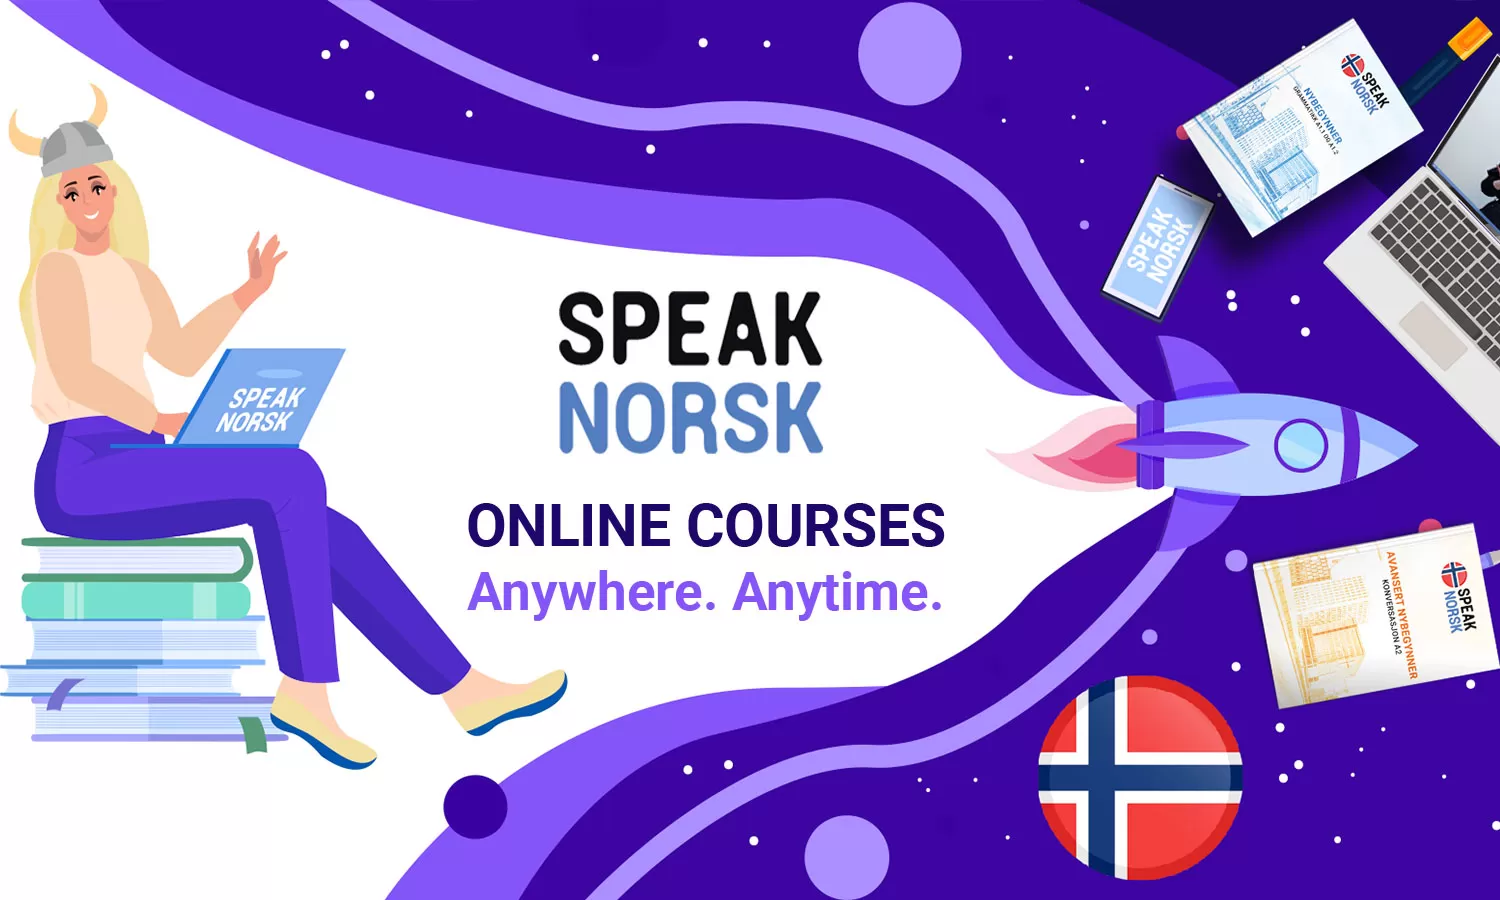 Learn Norwegian with Speak Norsk online courses